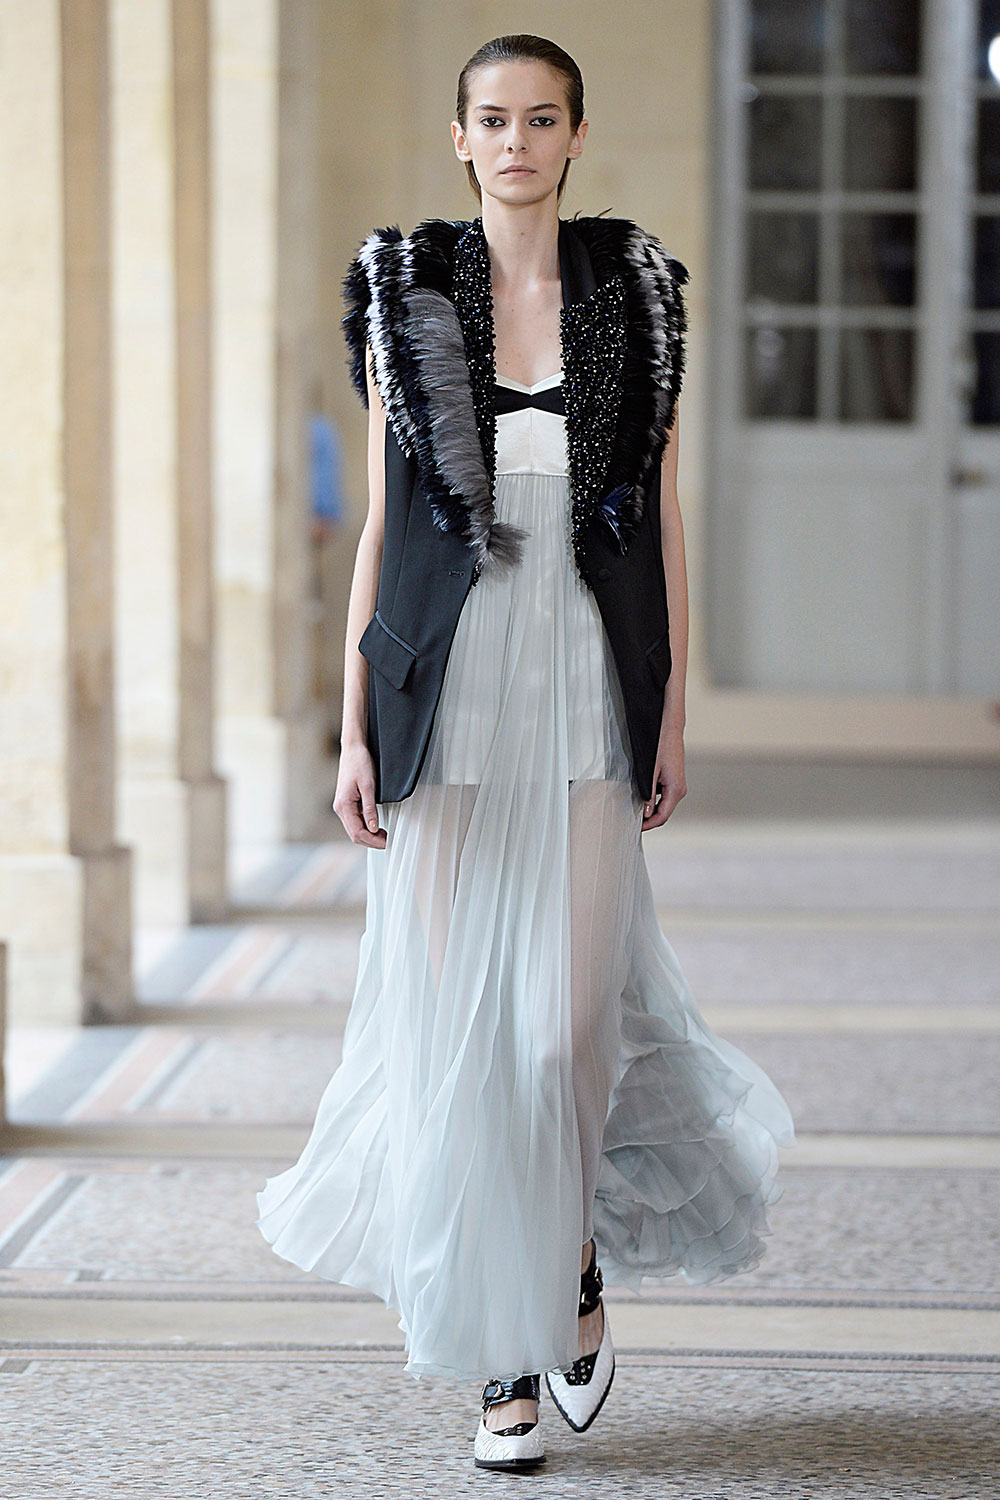 Look 4 from the Bouchra Jarrar show at Paris Fashion Week Haute Couture FW 2015/2016. Photo / Getty Images